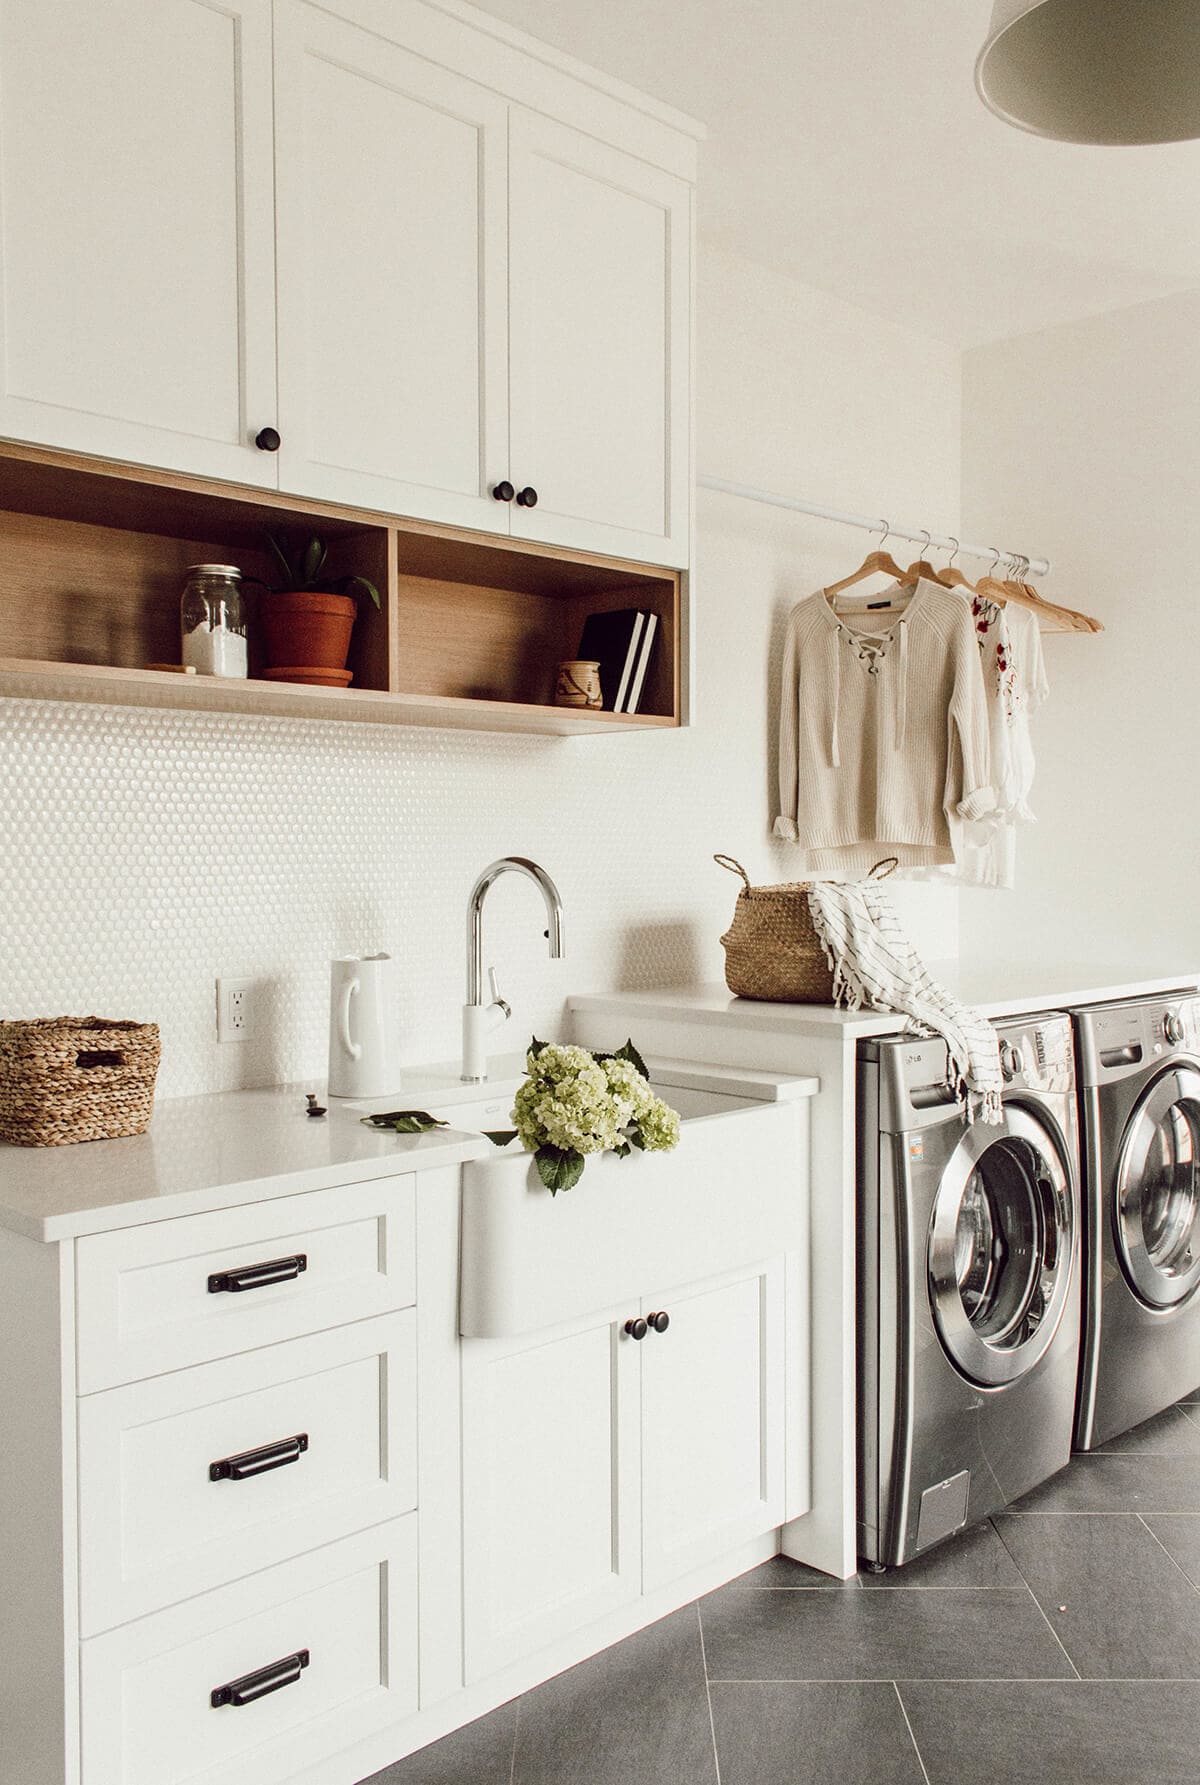 29 ideas to decorate your laundry room in vintage style - 73